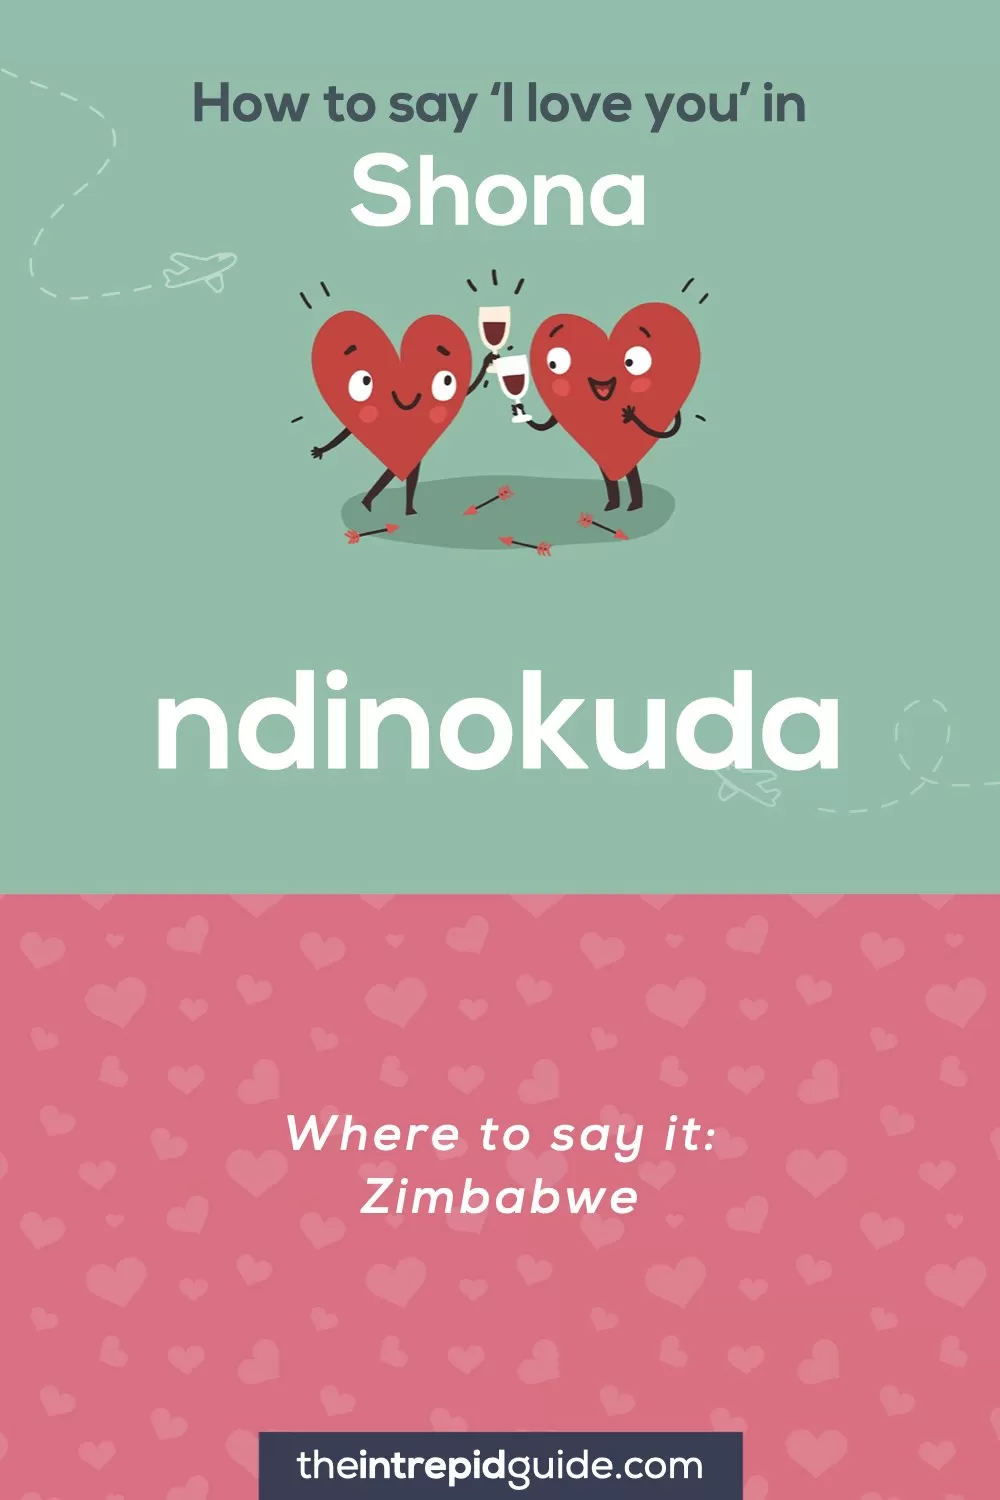 How to say I love you in different languages - Shona - ndinokuda